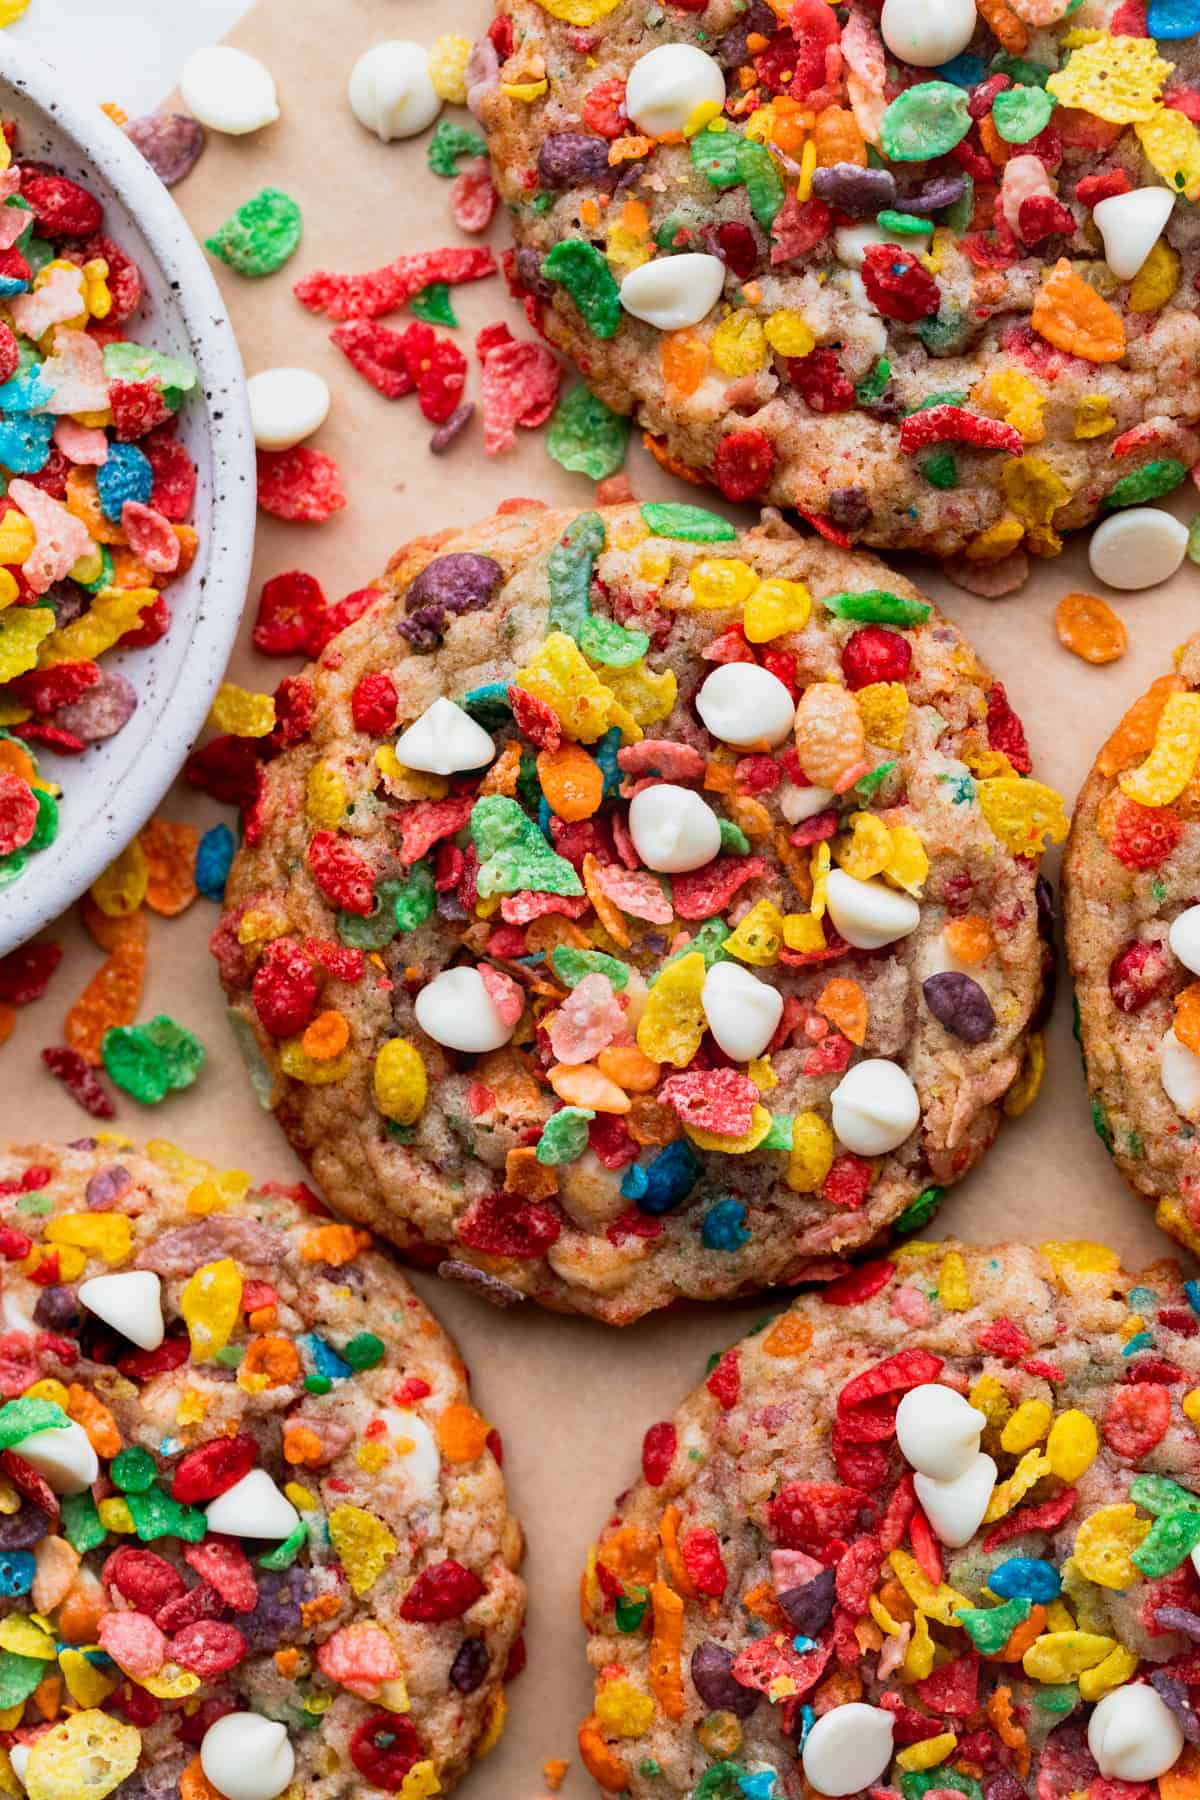 Fruity pebble cookies on a parchment paper.